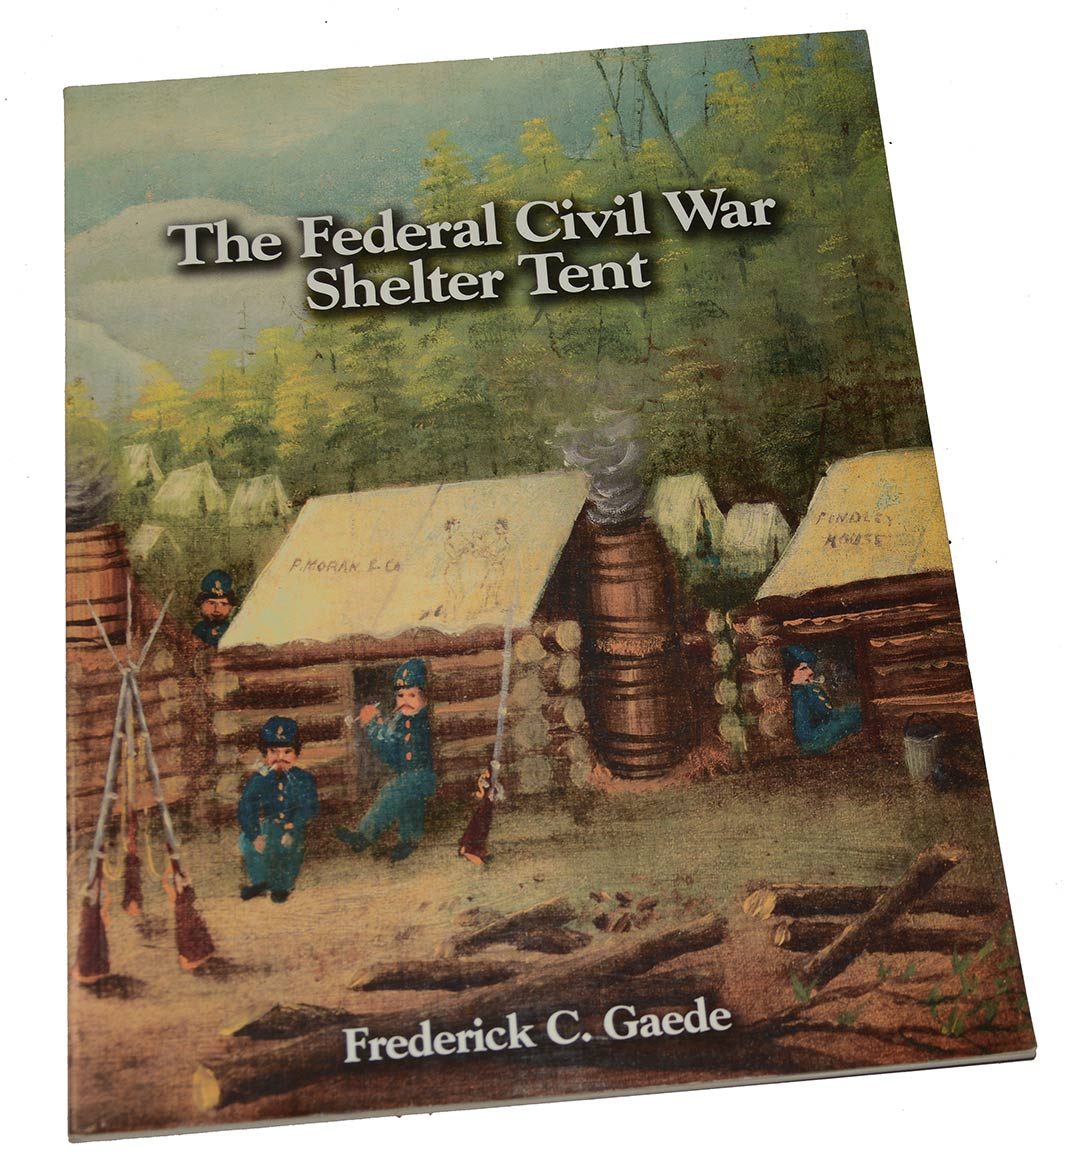 FIRST EDITION COPY OF A STUDY ON US ARMY SHELTER TENTS OF THE CIVIL WAR